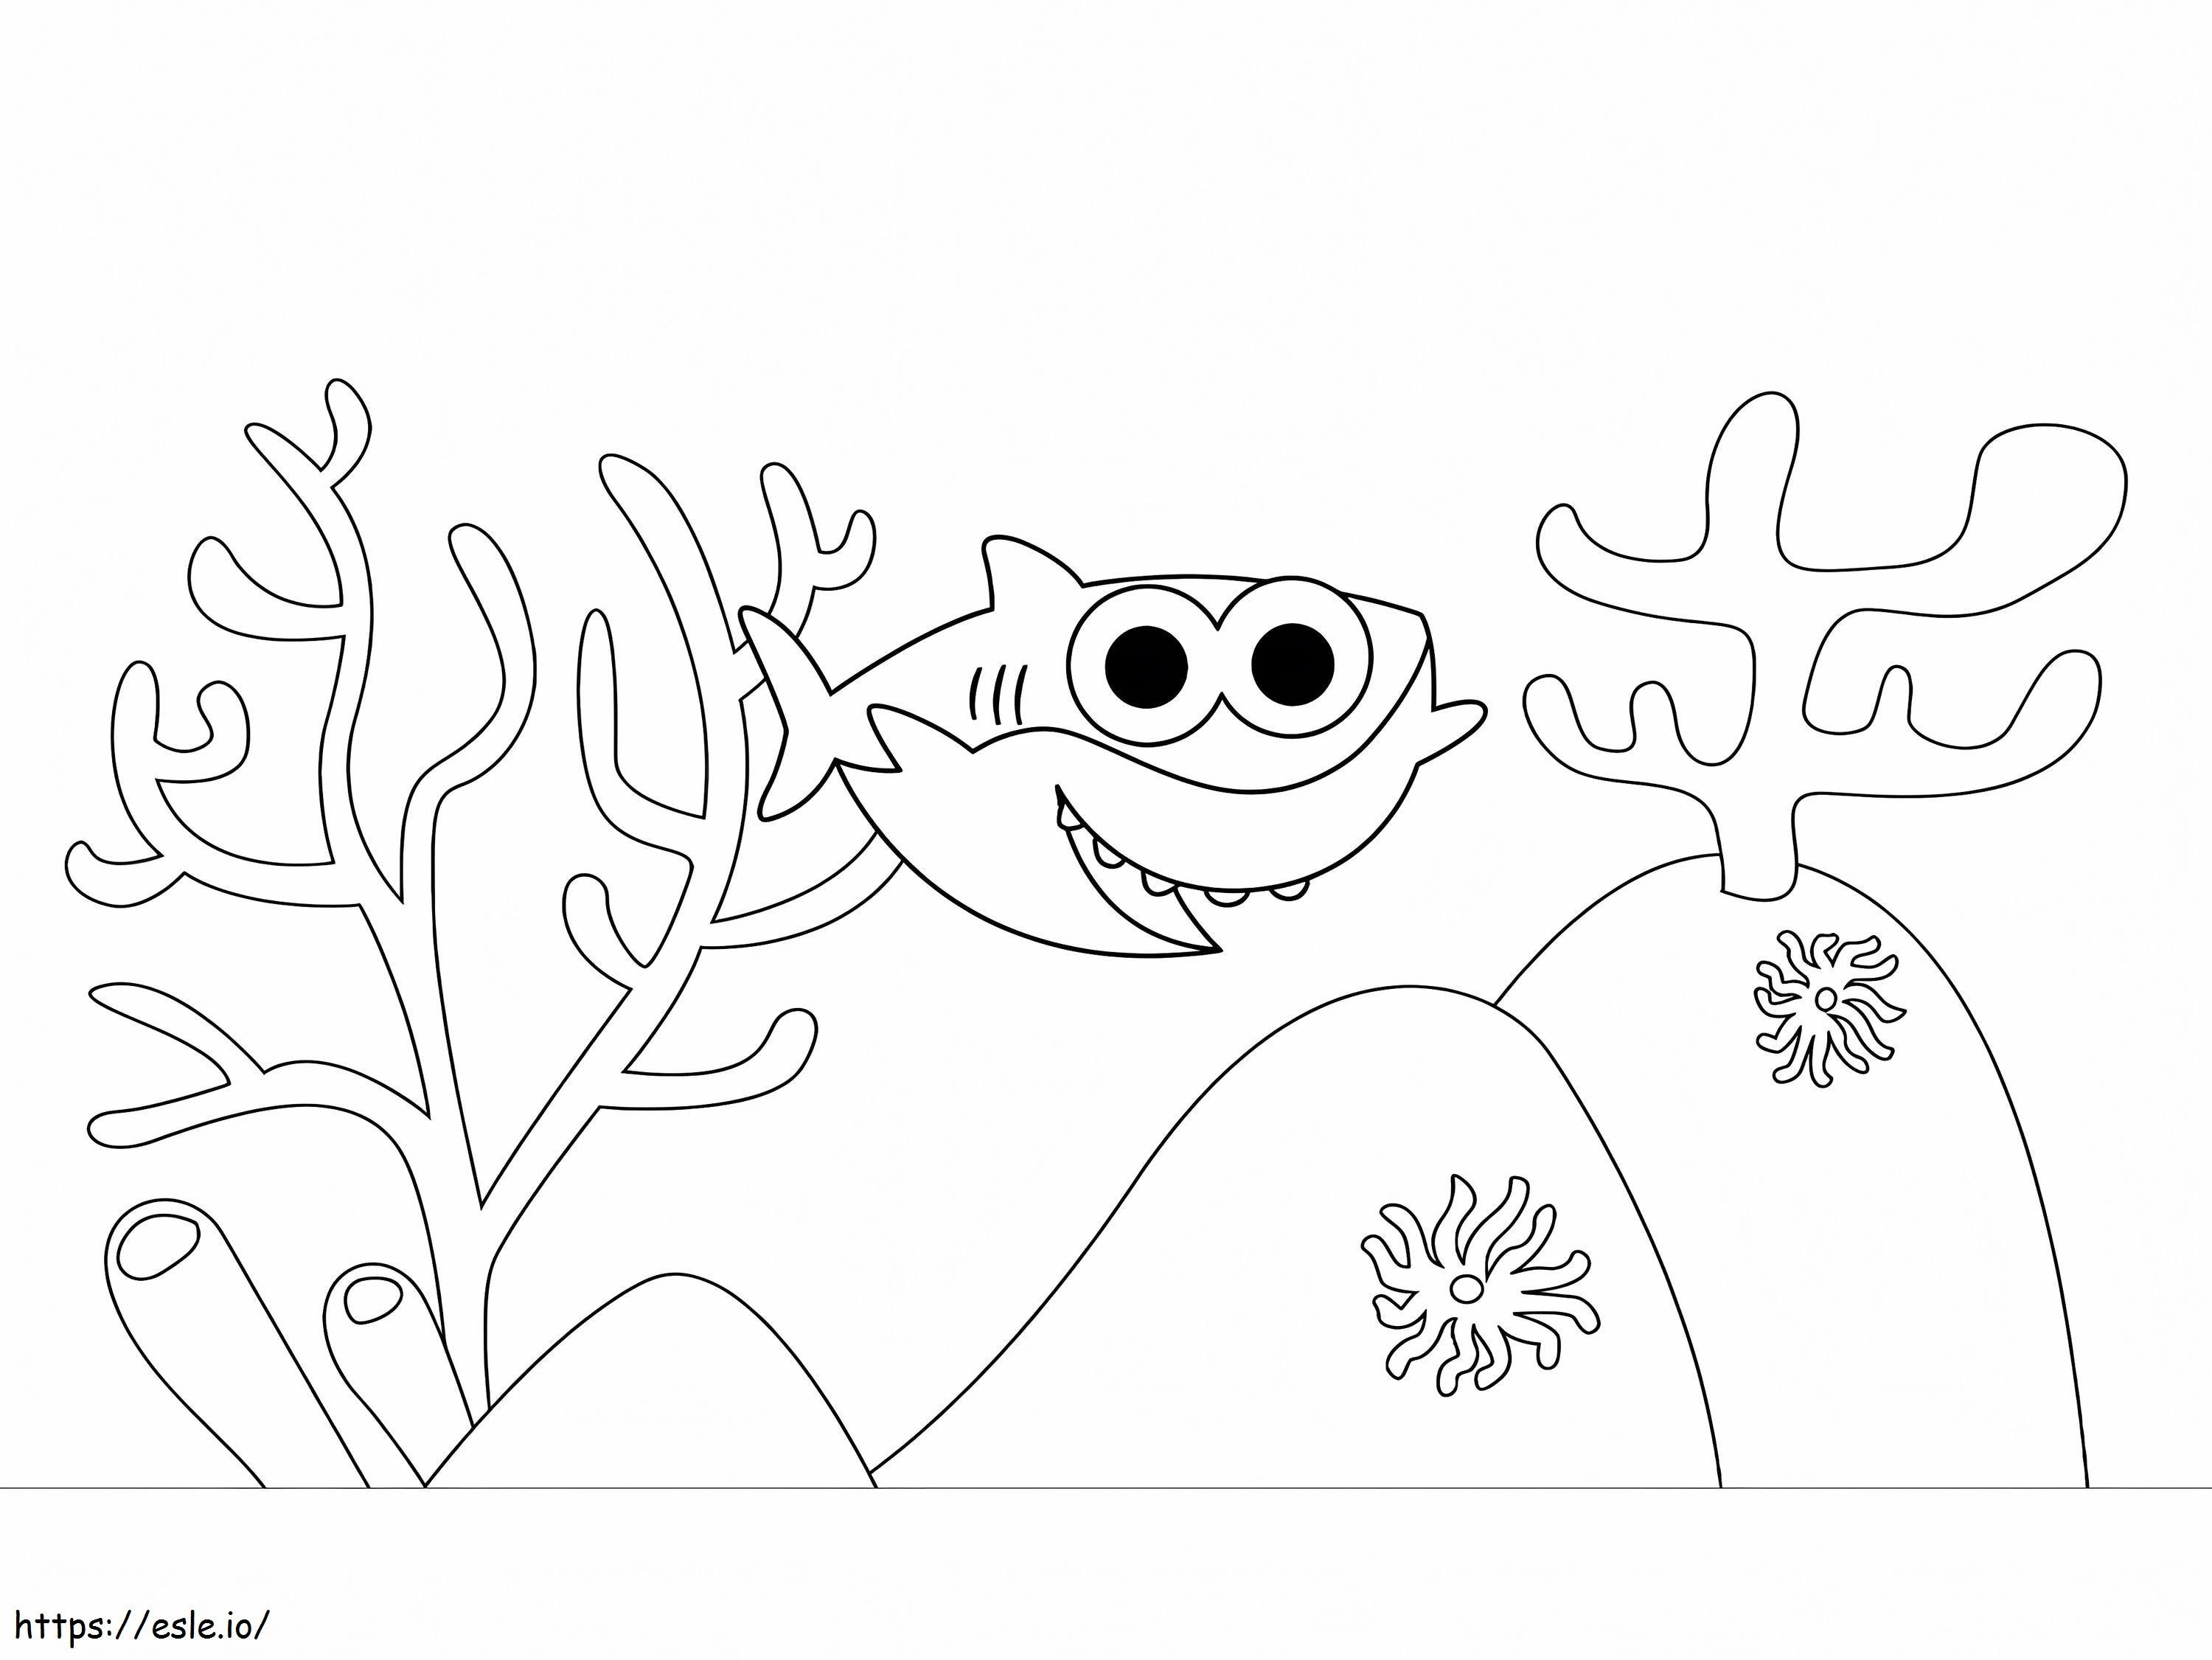 1583892275 Baby Shark Worksheet Color 2 1024X724 1 coloring page